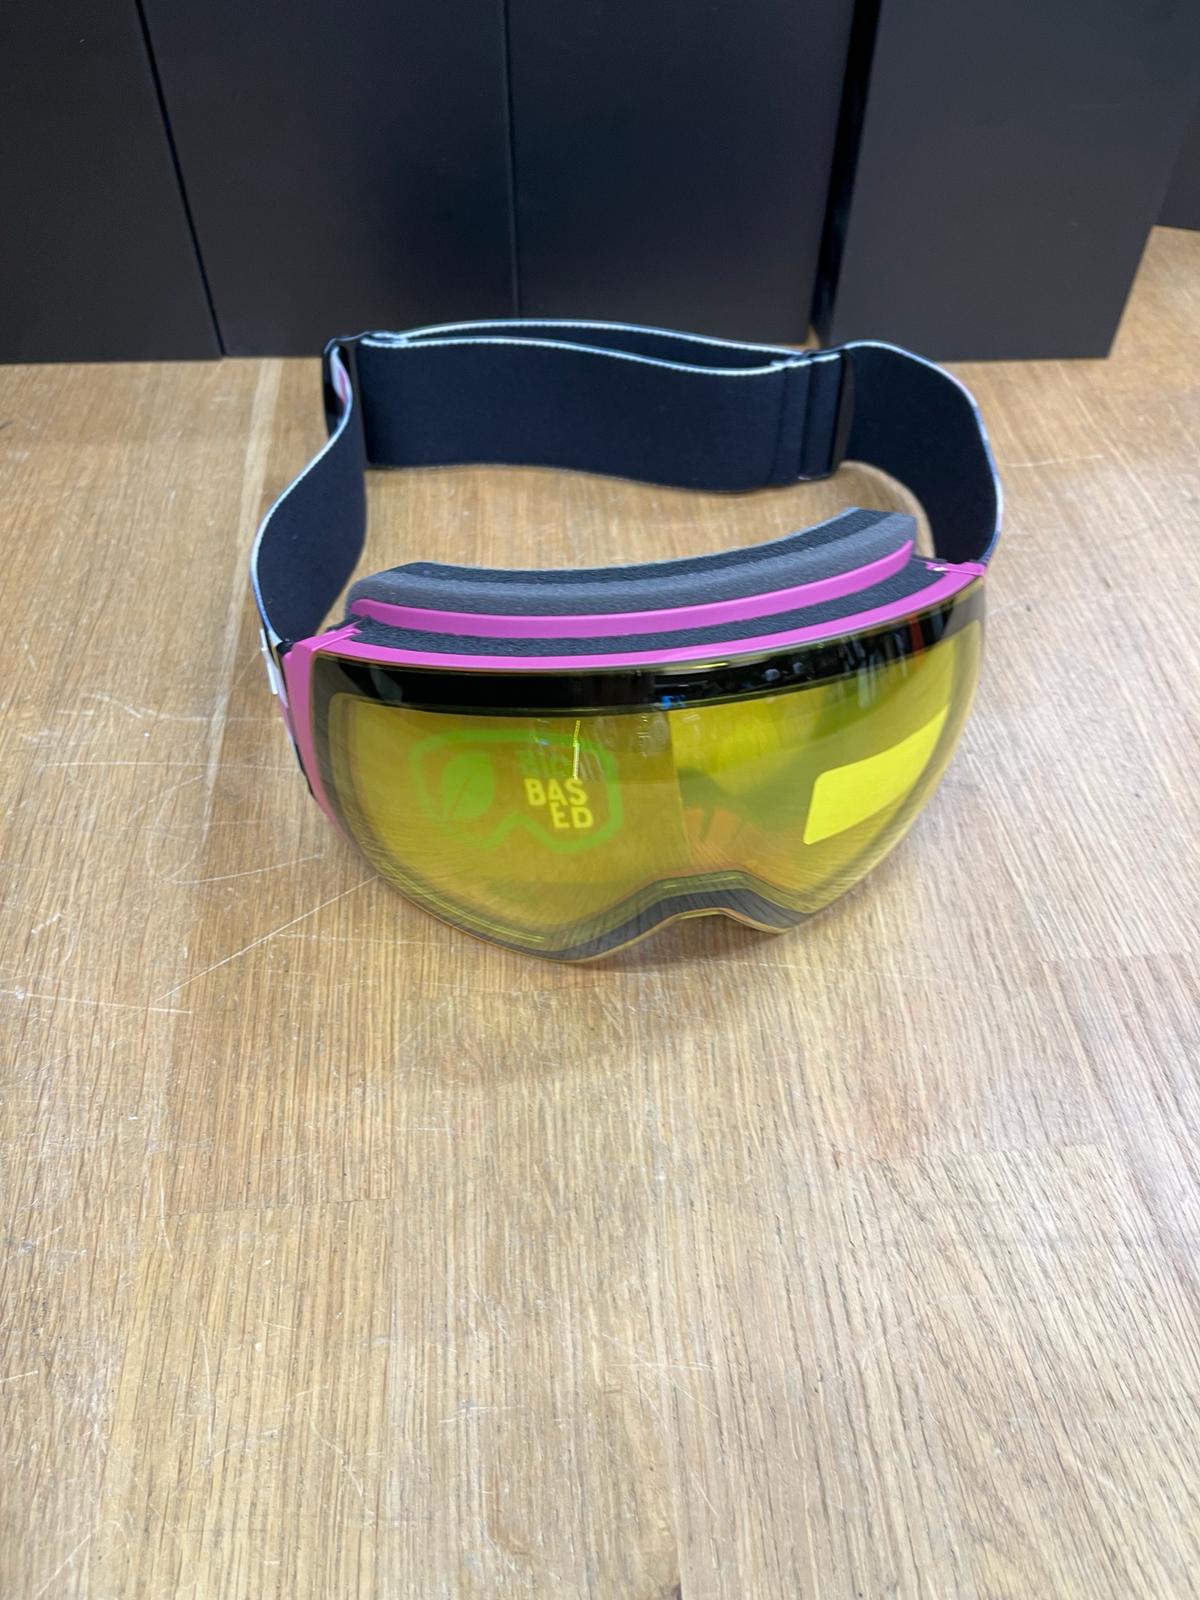 Aphex Styx Goggle strawberry Silver Lens ( with extra yellow lens )